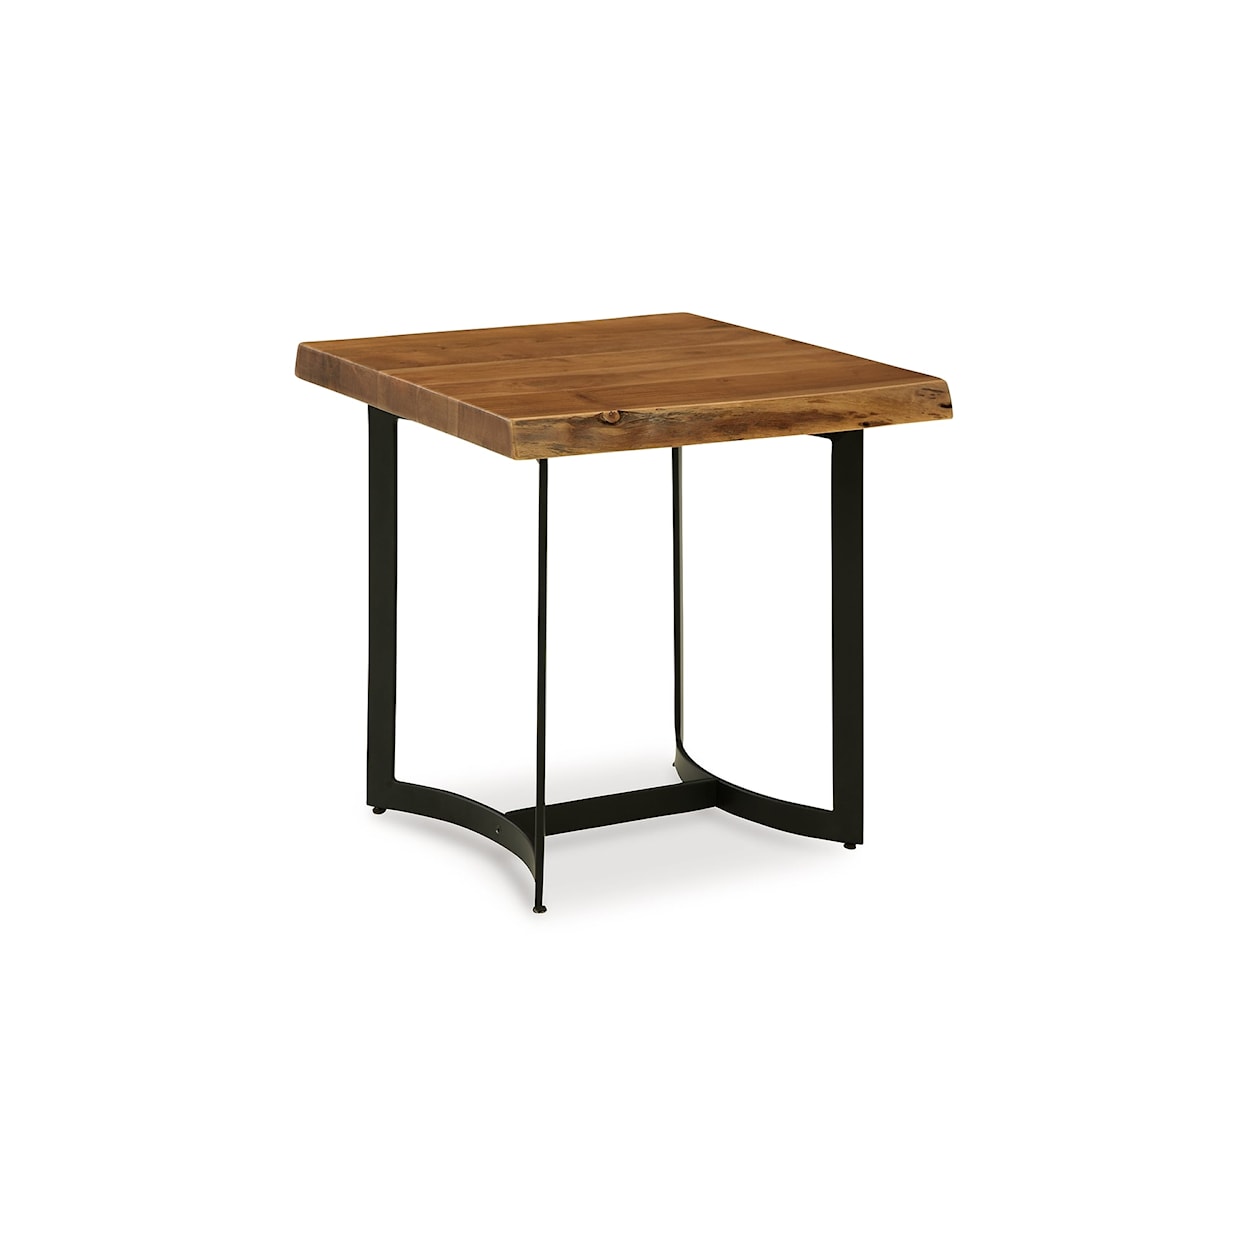 Benchcraft Fortmaine Rectangular End Table